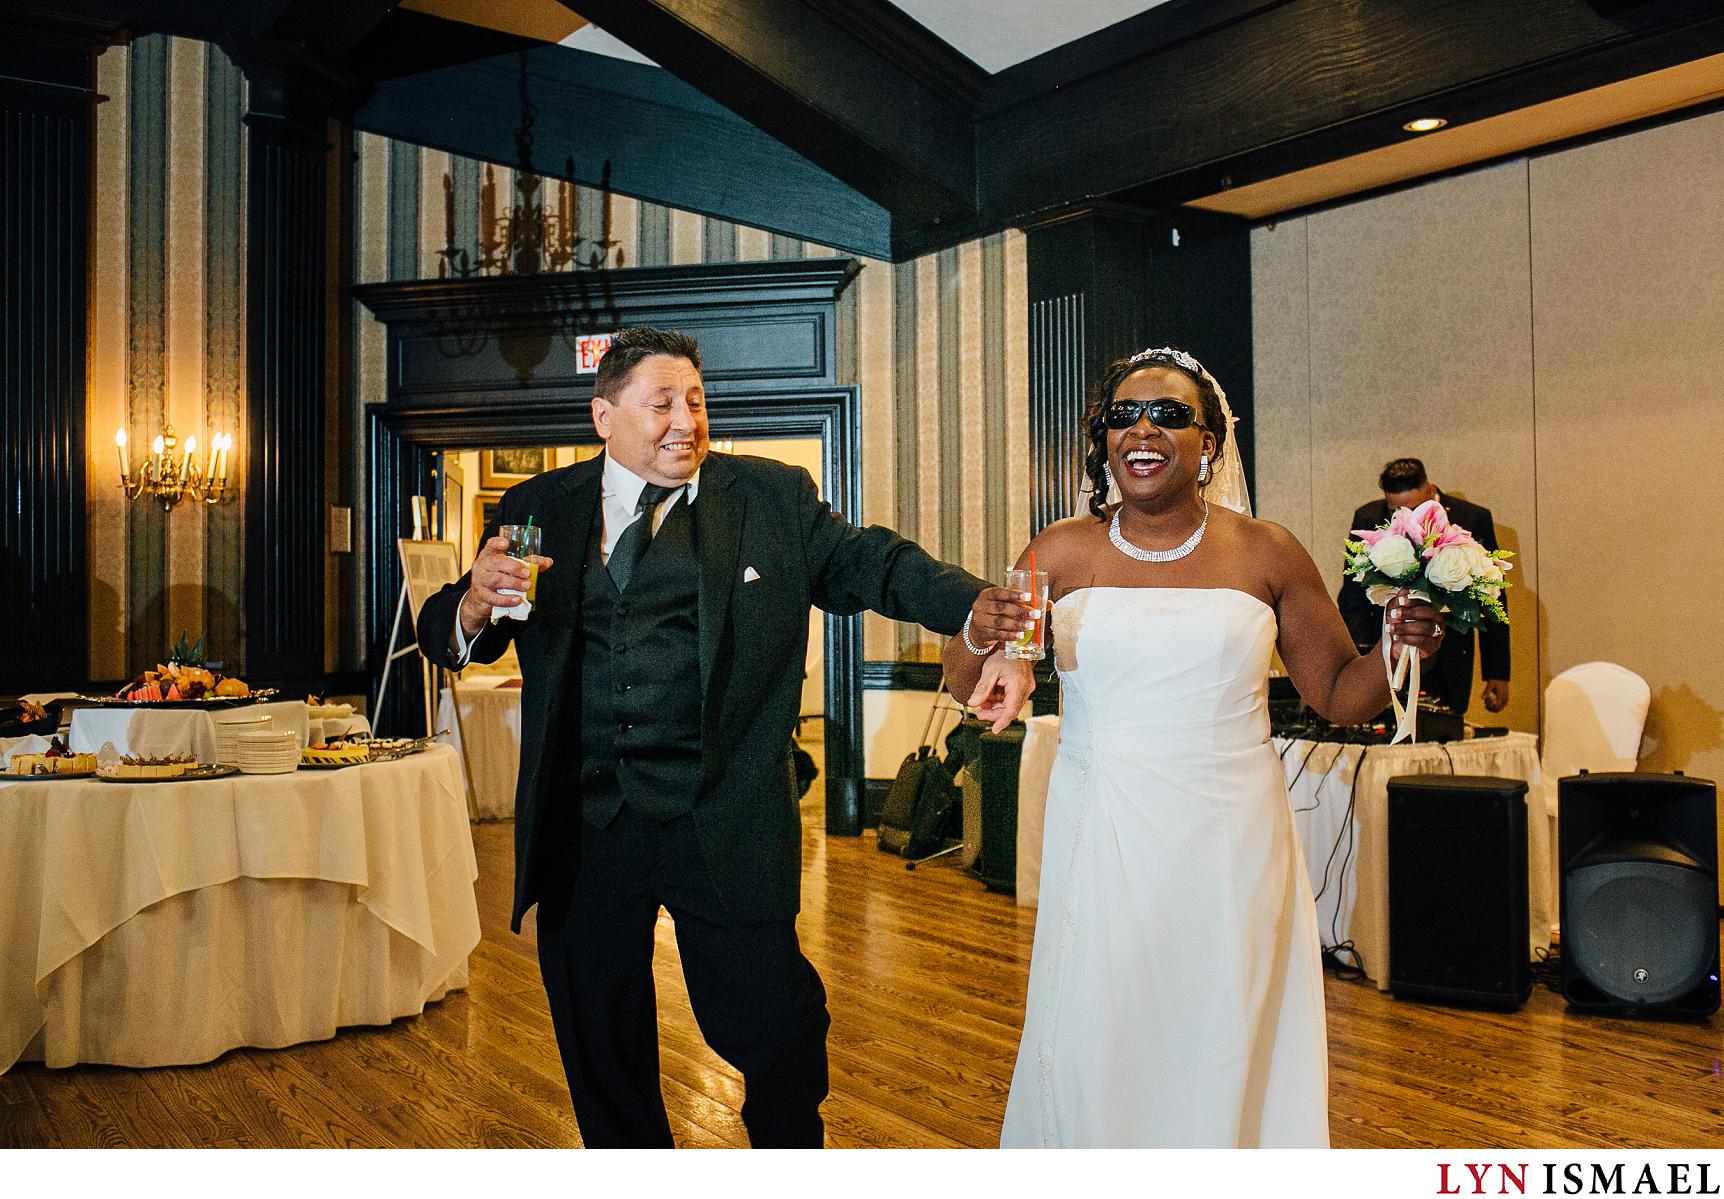 Bride and groom's enters their wedding reception at the Old Mill Inn in Toronto